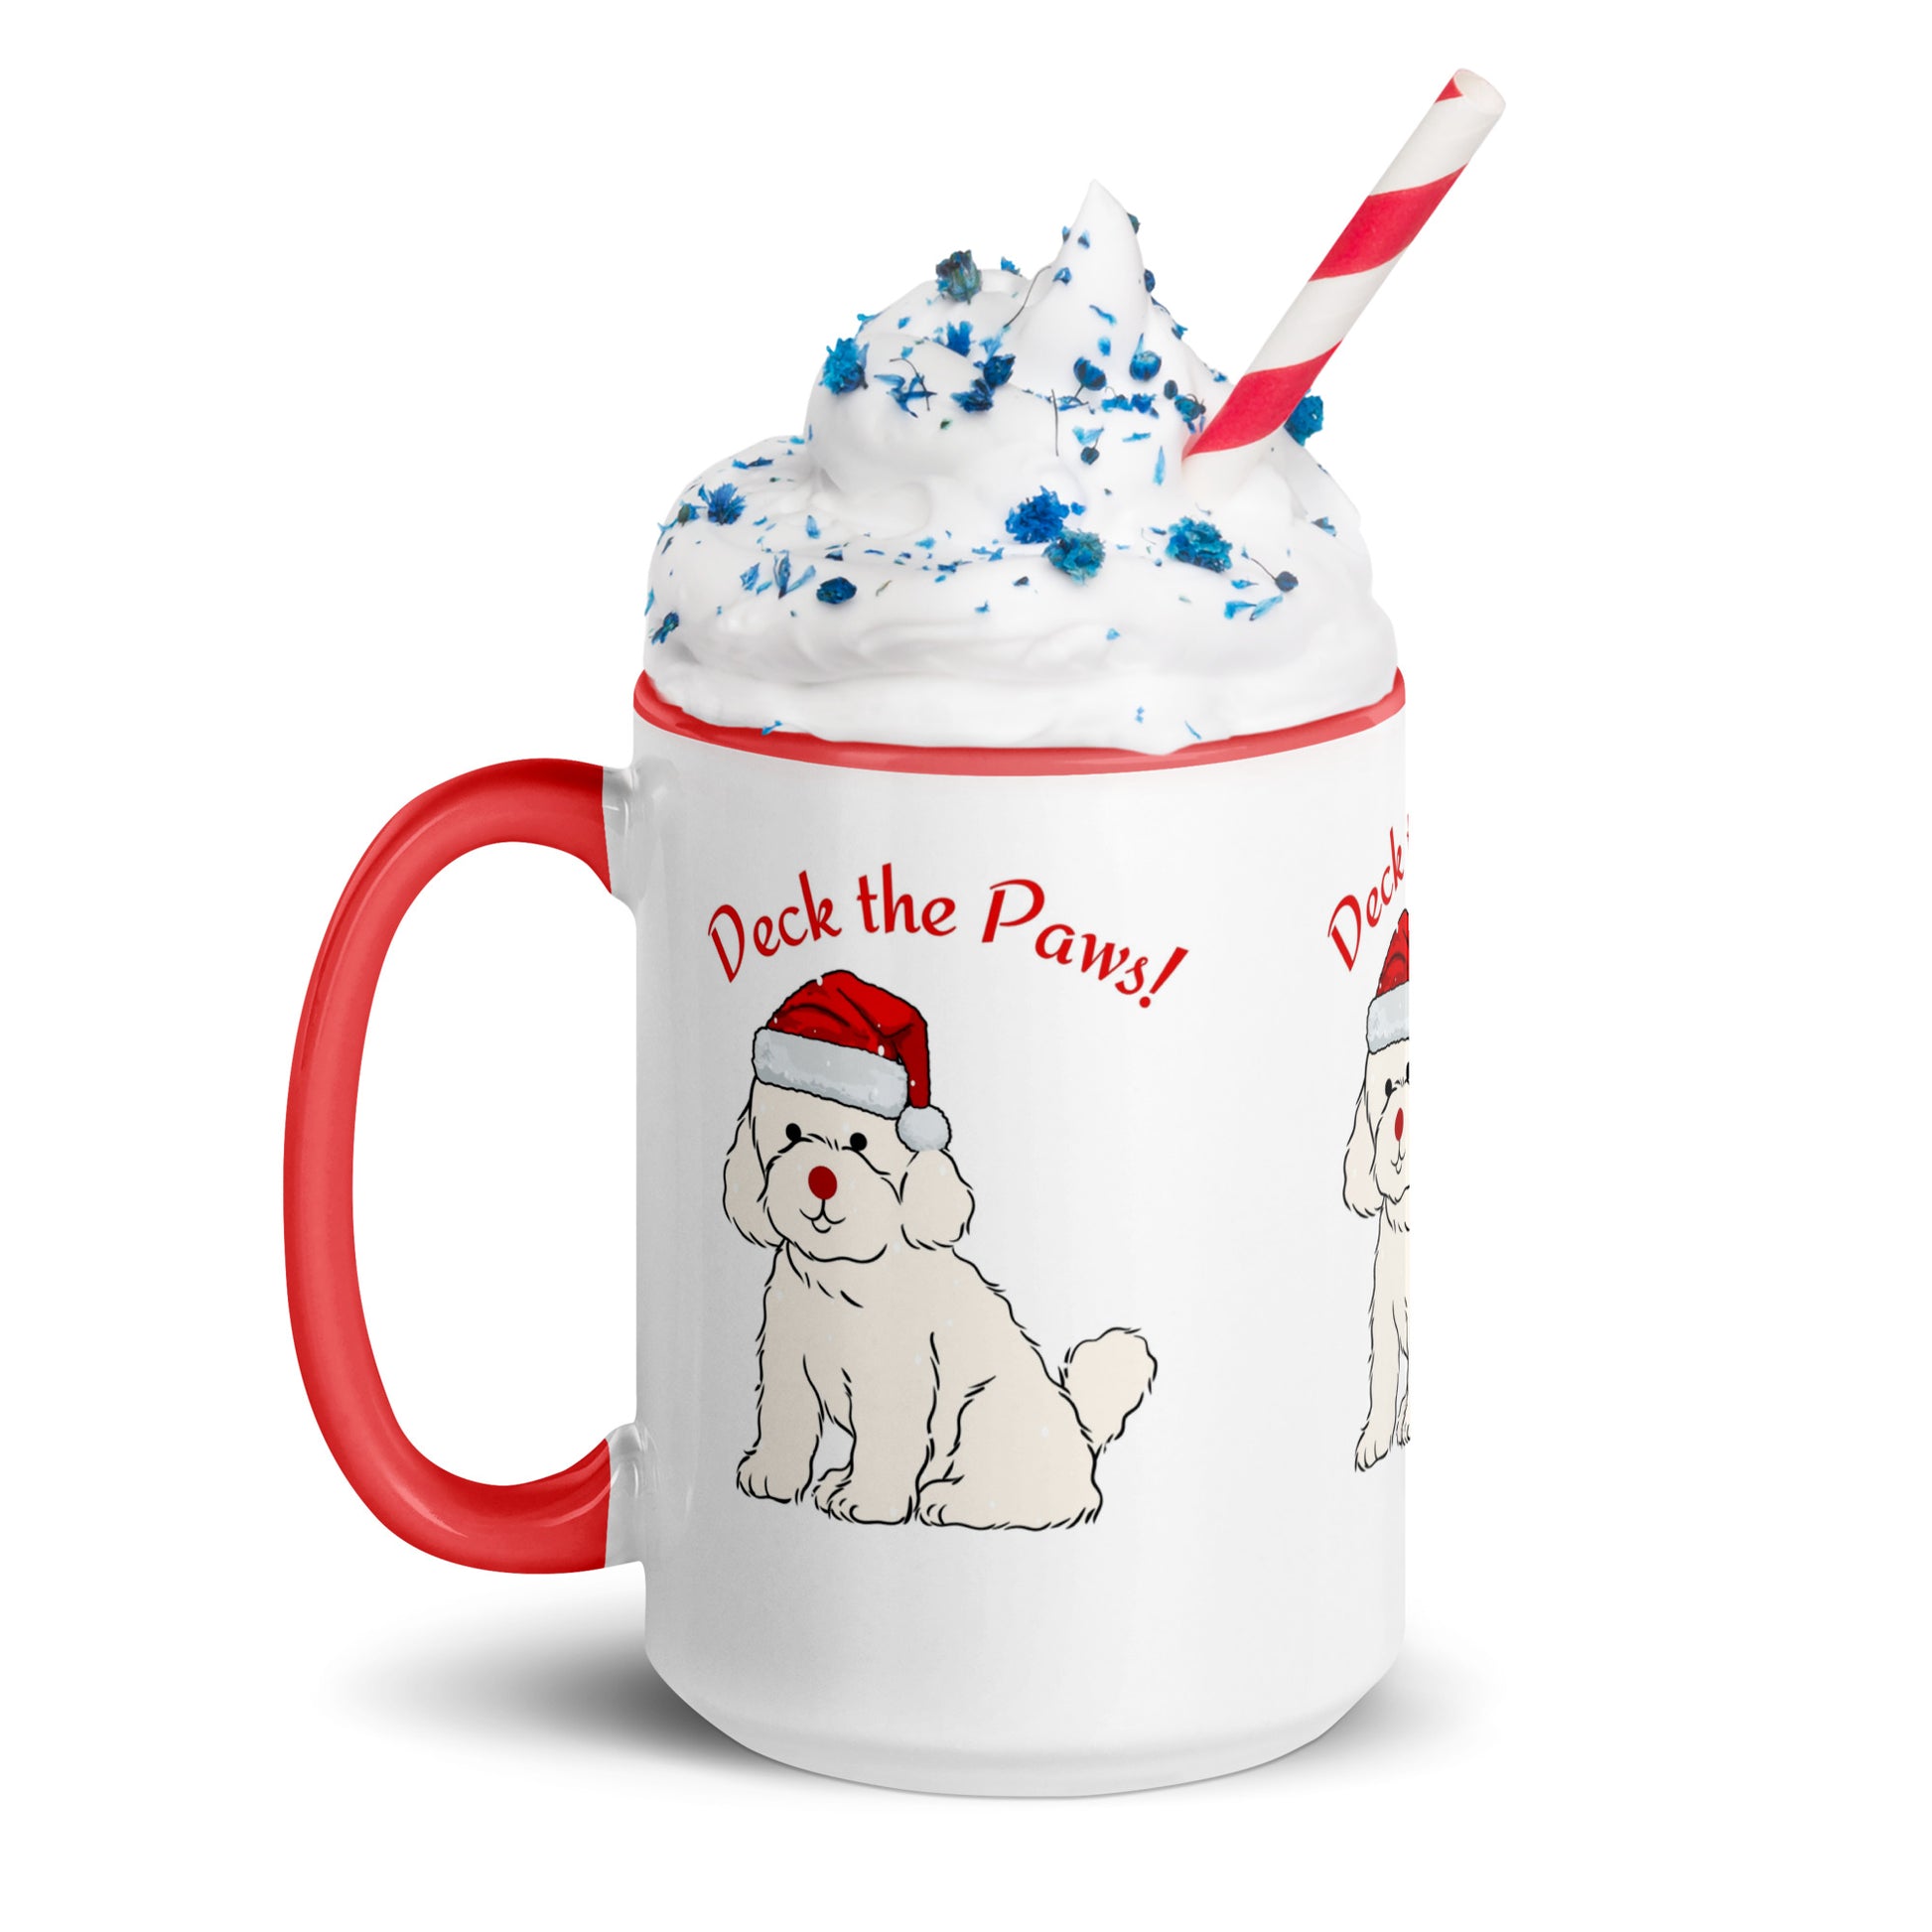 Cherish the Holidays with a Personalized Ceramic 'Deck the Paws' Christmas Mug. Cherish the holiday season with our personalized ceramic 'Deck the Paws' Christmas mug. This delightful, rustic-inspired mug is a perfect addition to your festive decor and a heartwarming gift option for dog lovers, inspiring moments of joy and warmth during the most wonderful time of the year.